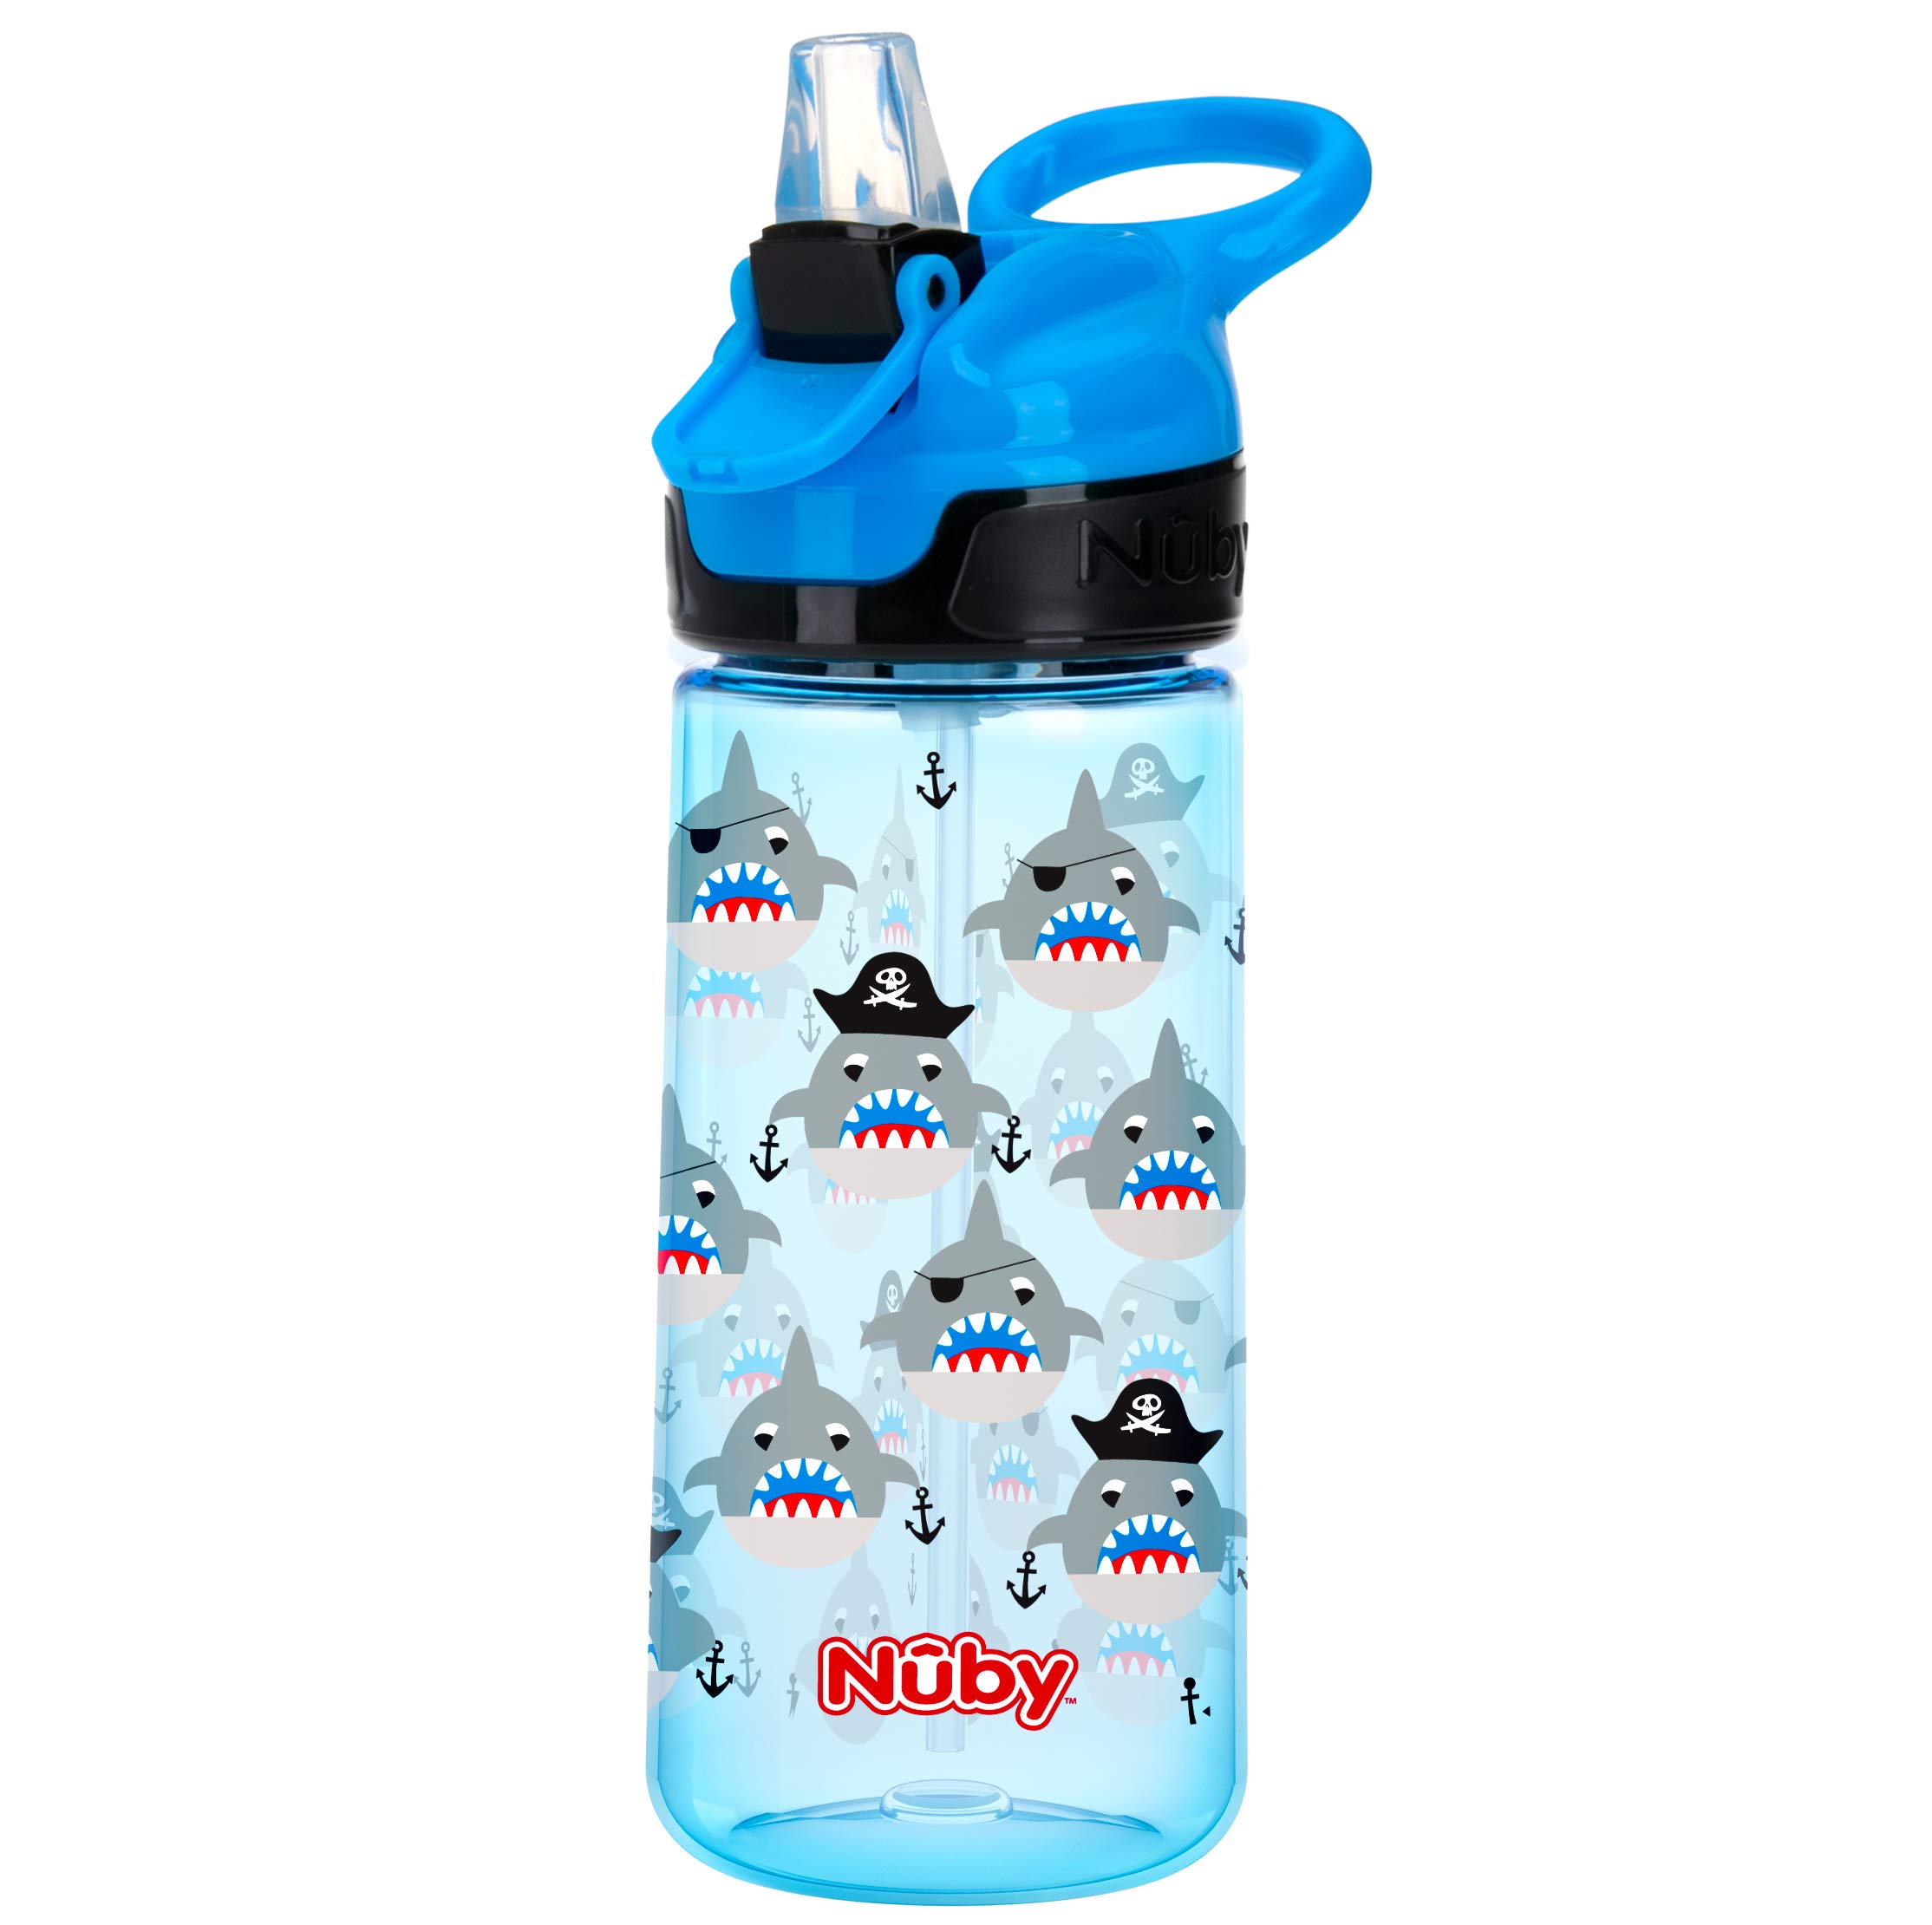 Nuby Thirsty Kids Flip-It Freestyle on The Go Water Bottle with Bite Resistant Hard Straw Cup and Easy Grip Band, Blue Cars, 12 Ounce